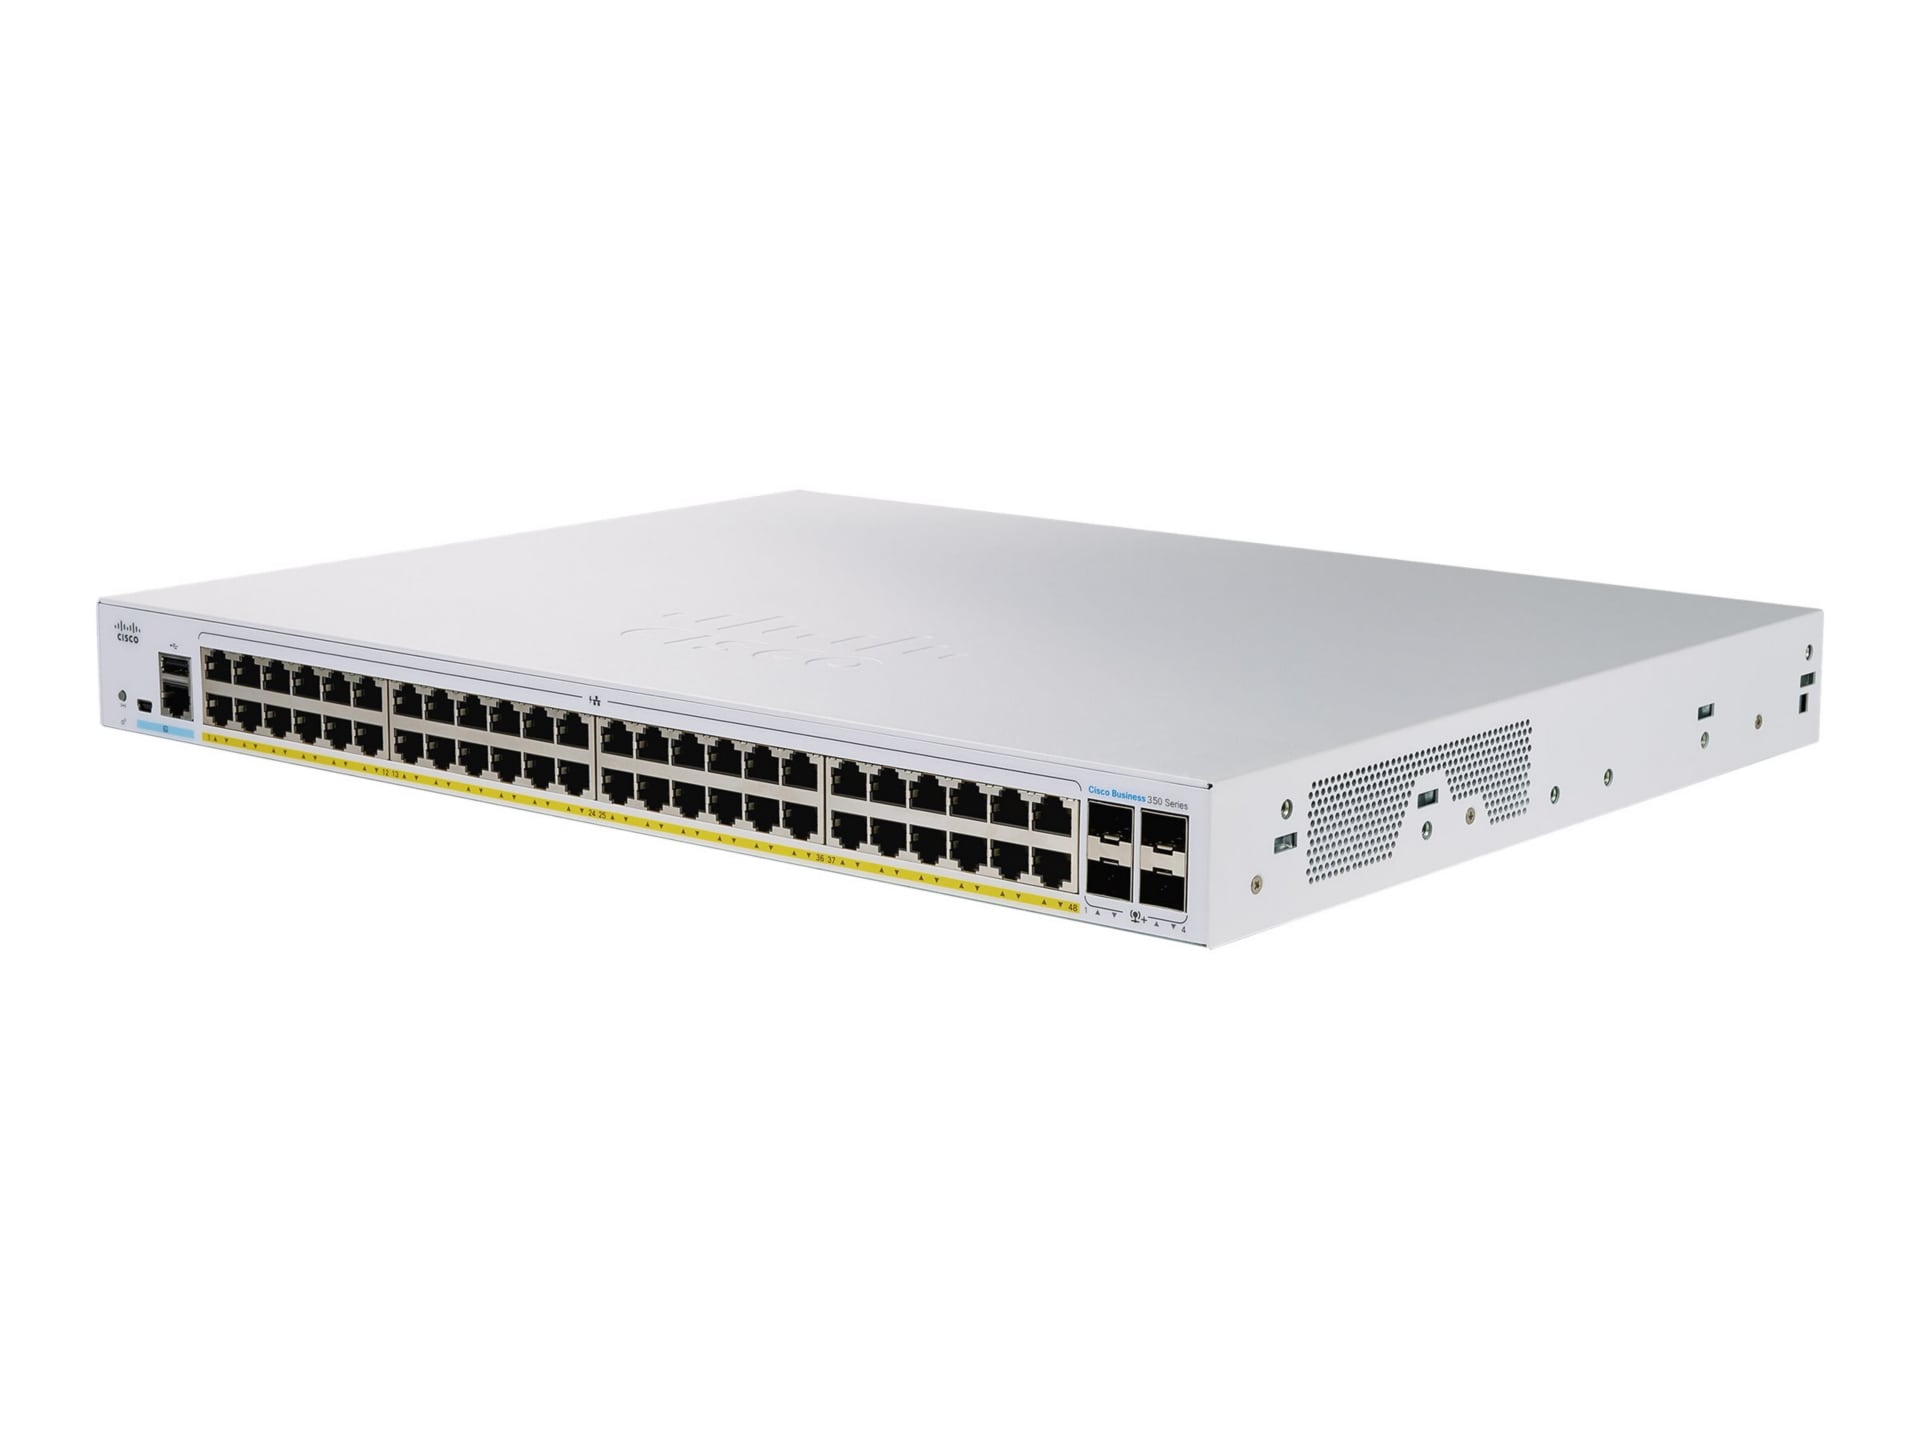 Cisco Business 350 Series CBS350-48FP-4X - switch - 48 ports - managed - rack-mountable